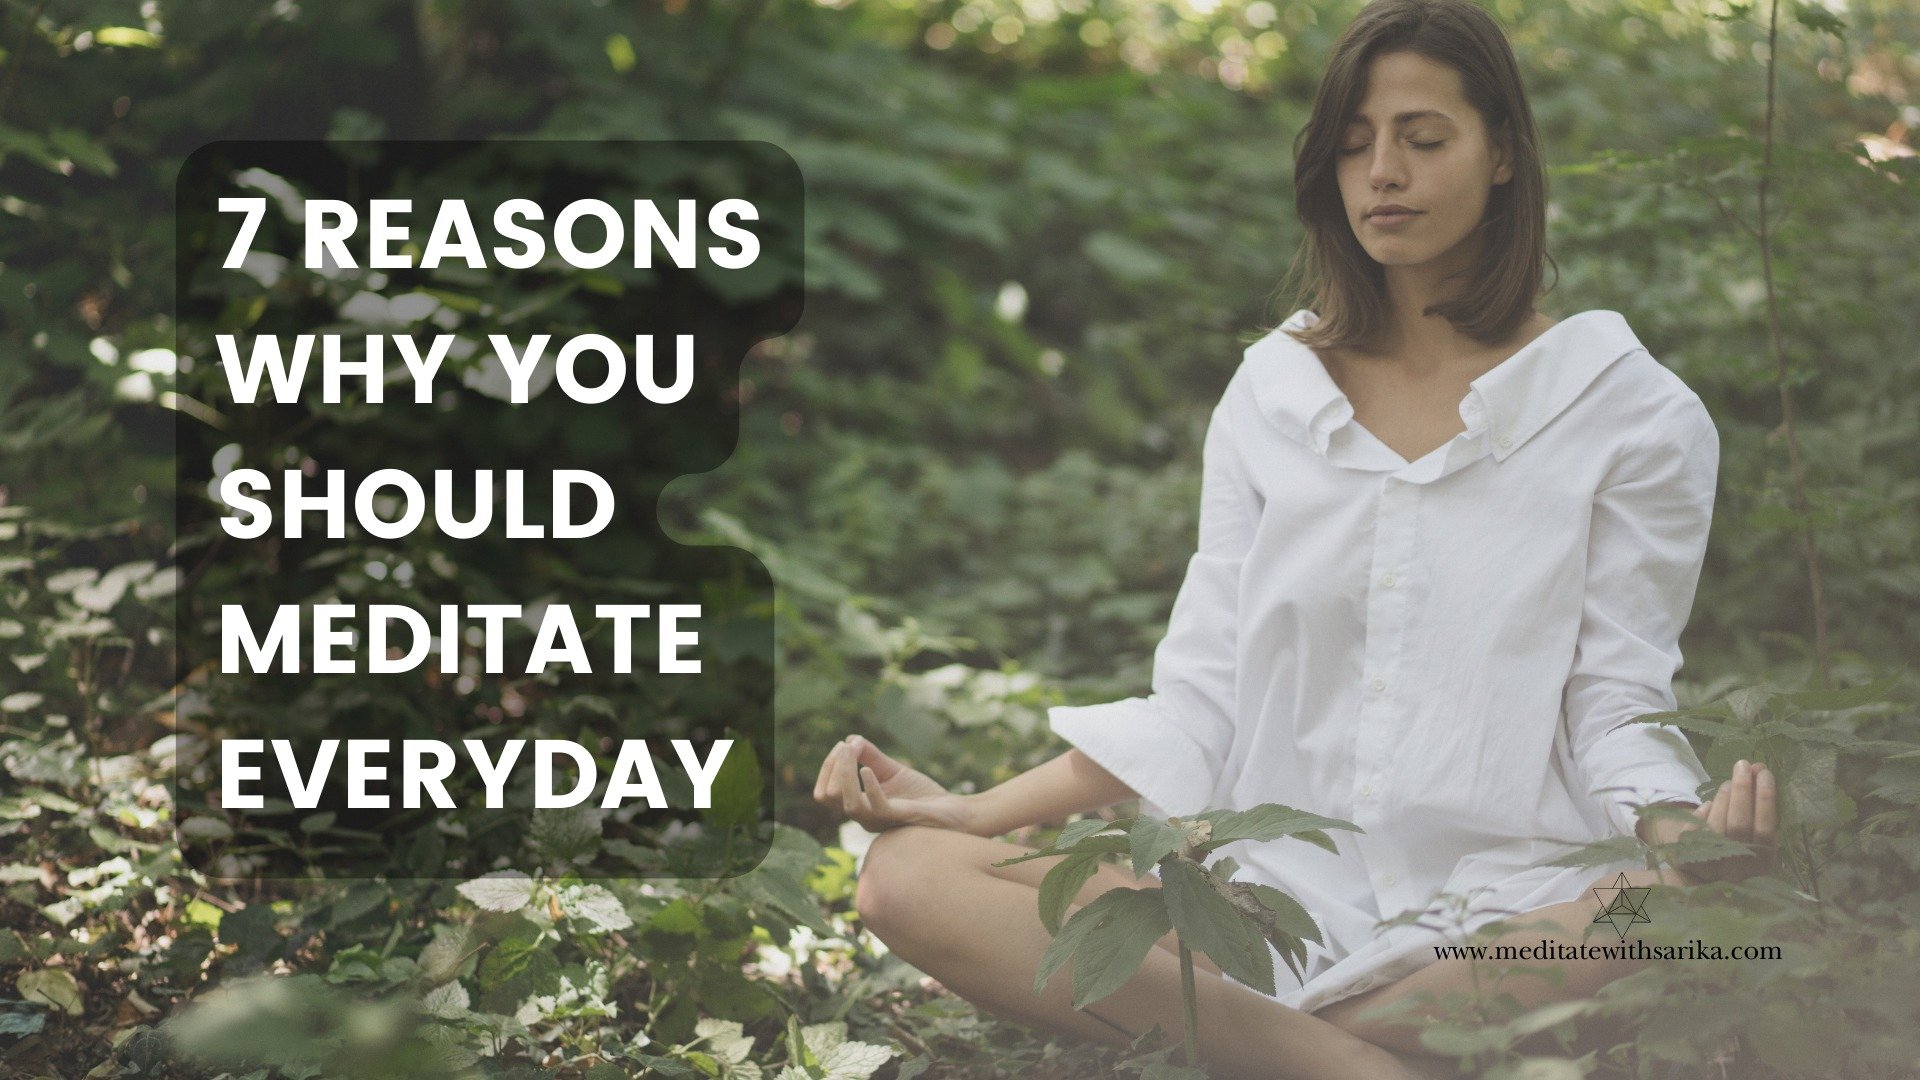 It's truly fascinating for me to witness how meditation and mindfulness are all the rage among celebrities and high performers these days? It seems like everyone's hopping on the bandwagon, and let me tell you, there's a darn good reason for it! 💡

